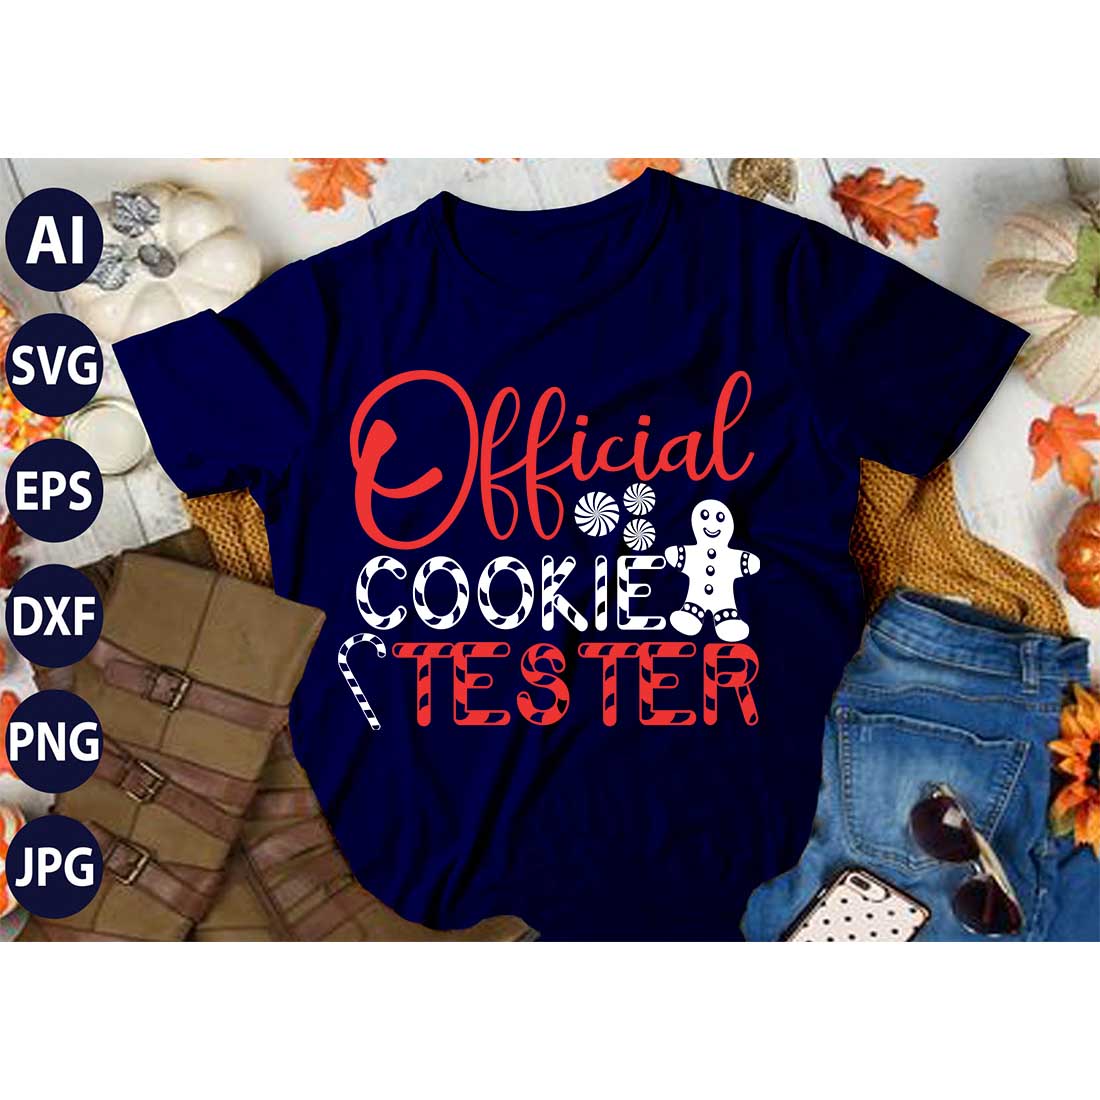 Official Cookie Tester all, SVG T-Shirt Design |Christmas It's All About Jesus Typography Tshirt Design | Ai, Svg, Eps, Dxf, Jpeg, Png, Instant download T-Shirt | 100% print-ready Digital vector file cover image.